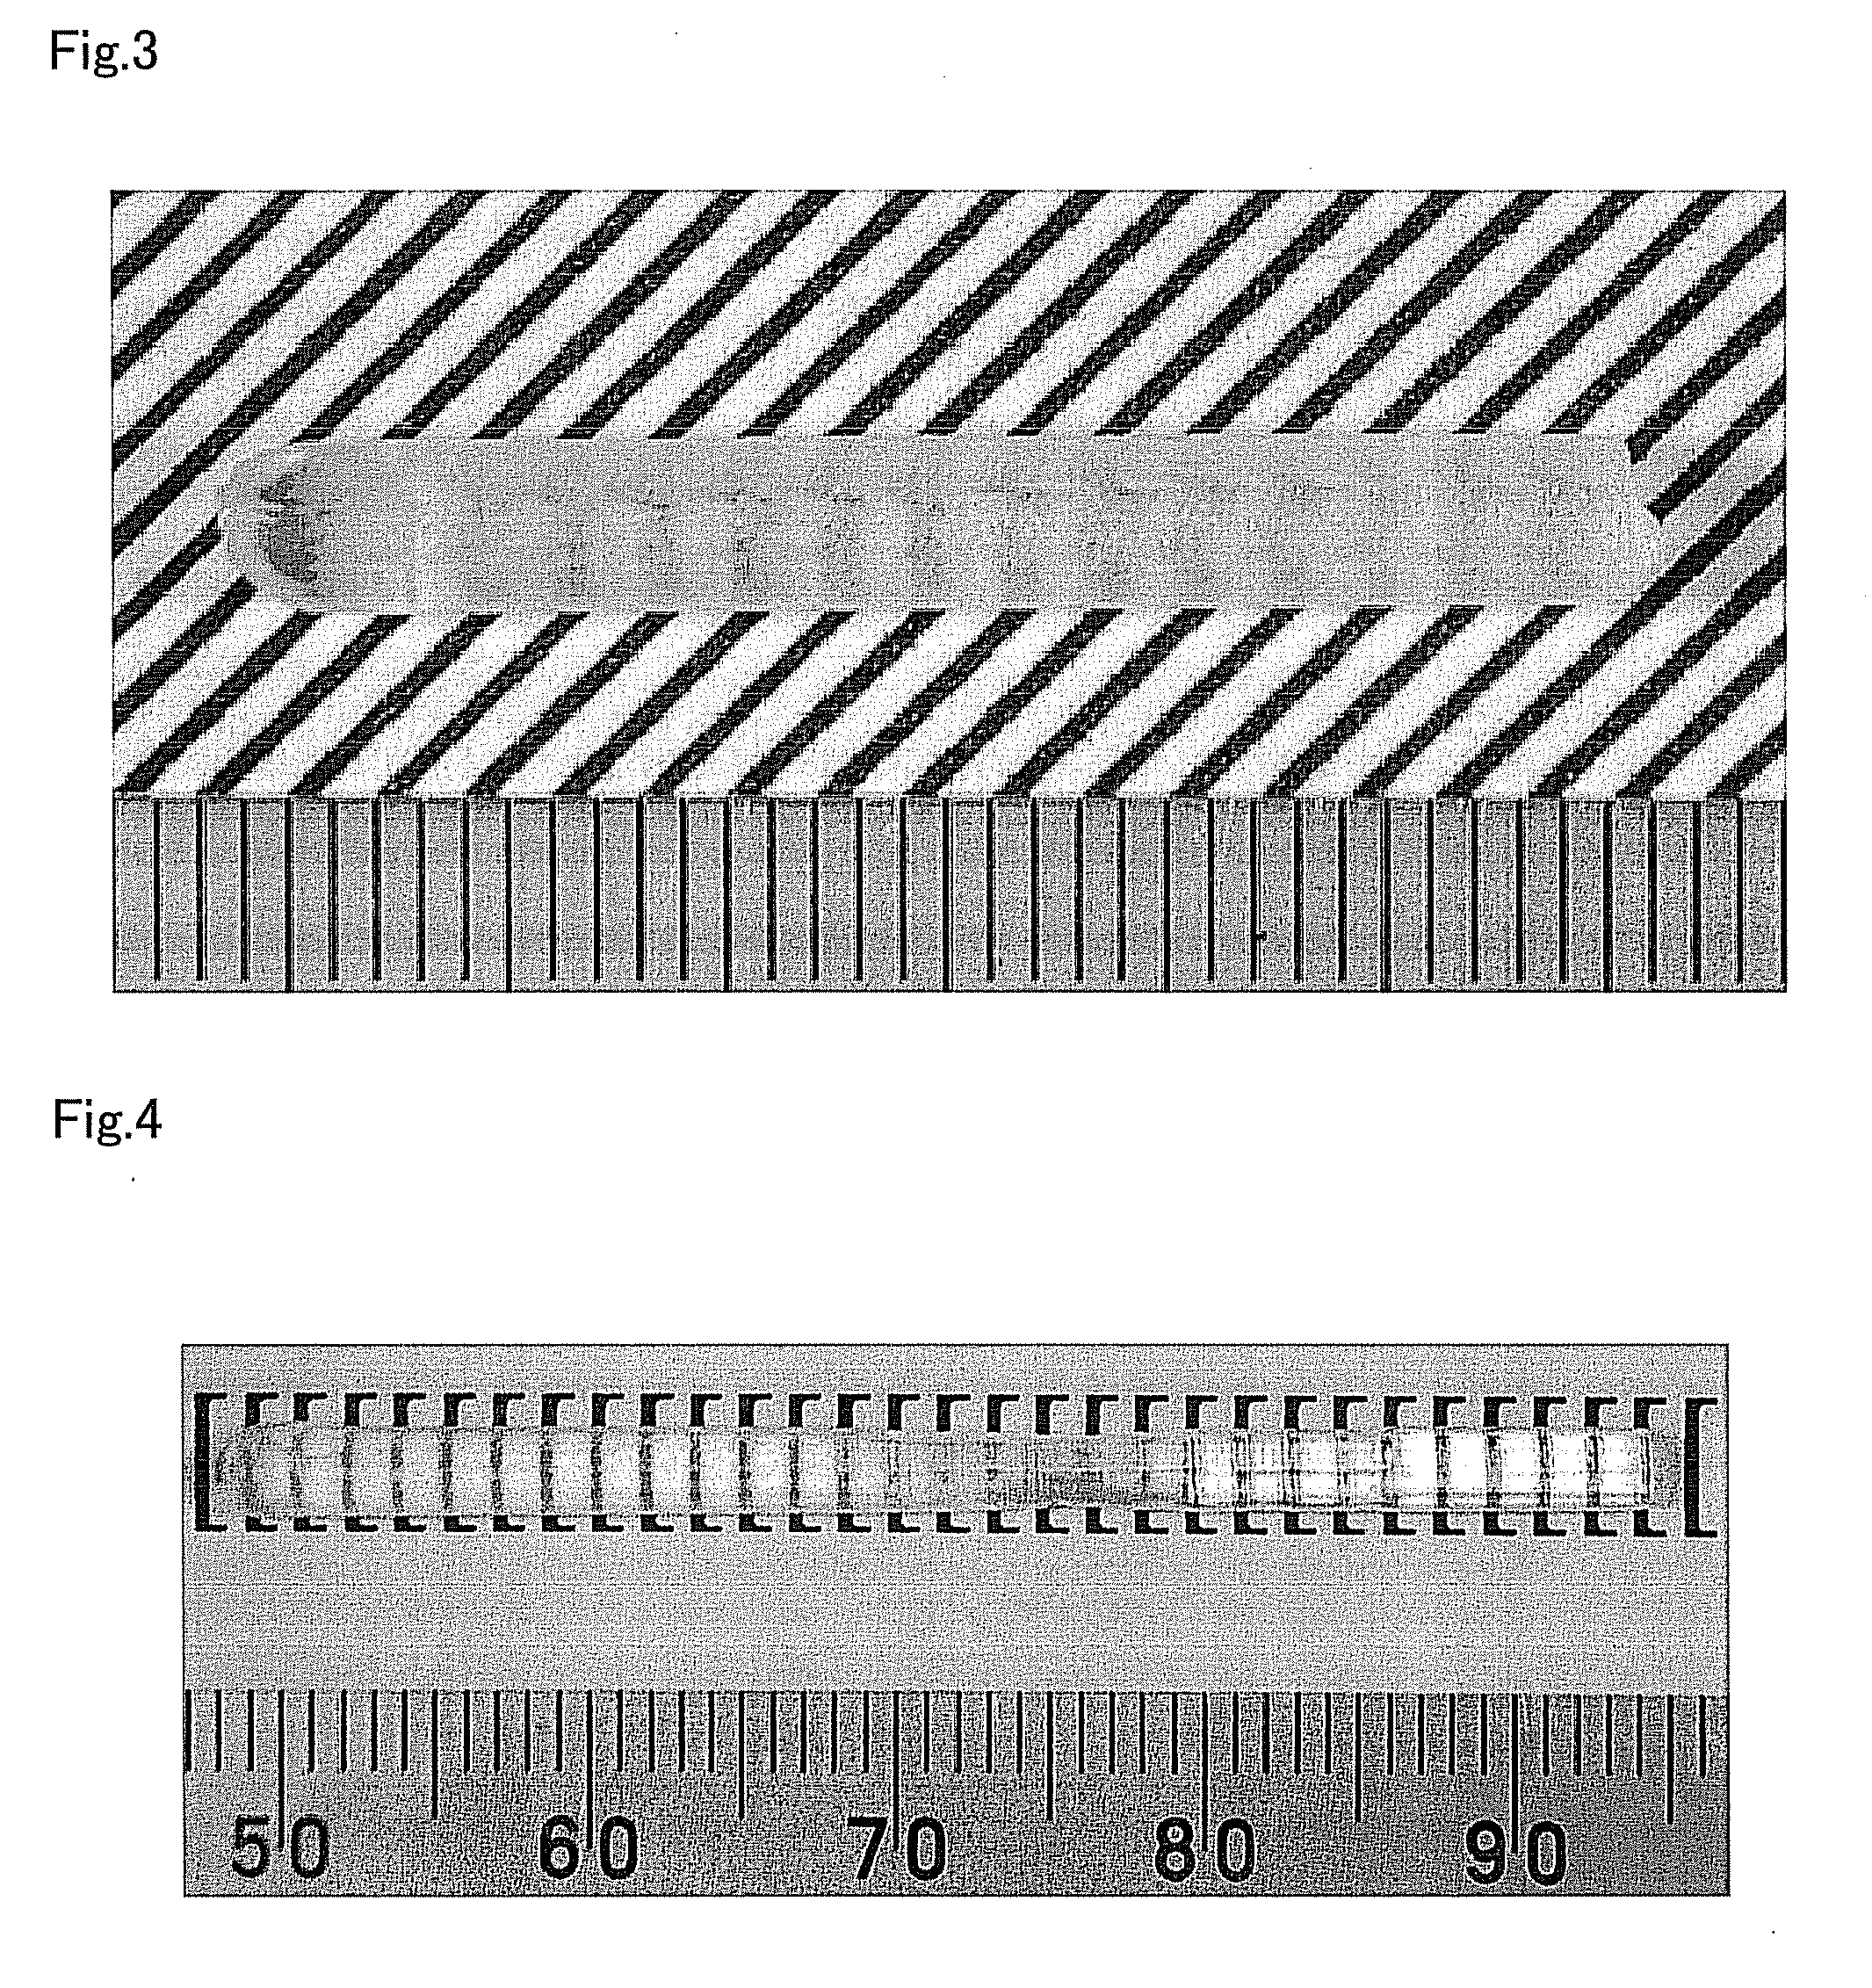 Pr-Containing Scintillator Single Crystal, Method of Manufacturing the Same, Radiation Detector, and Inspection Apparatus